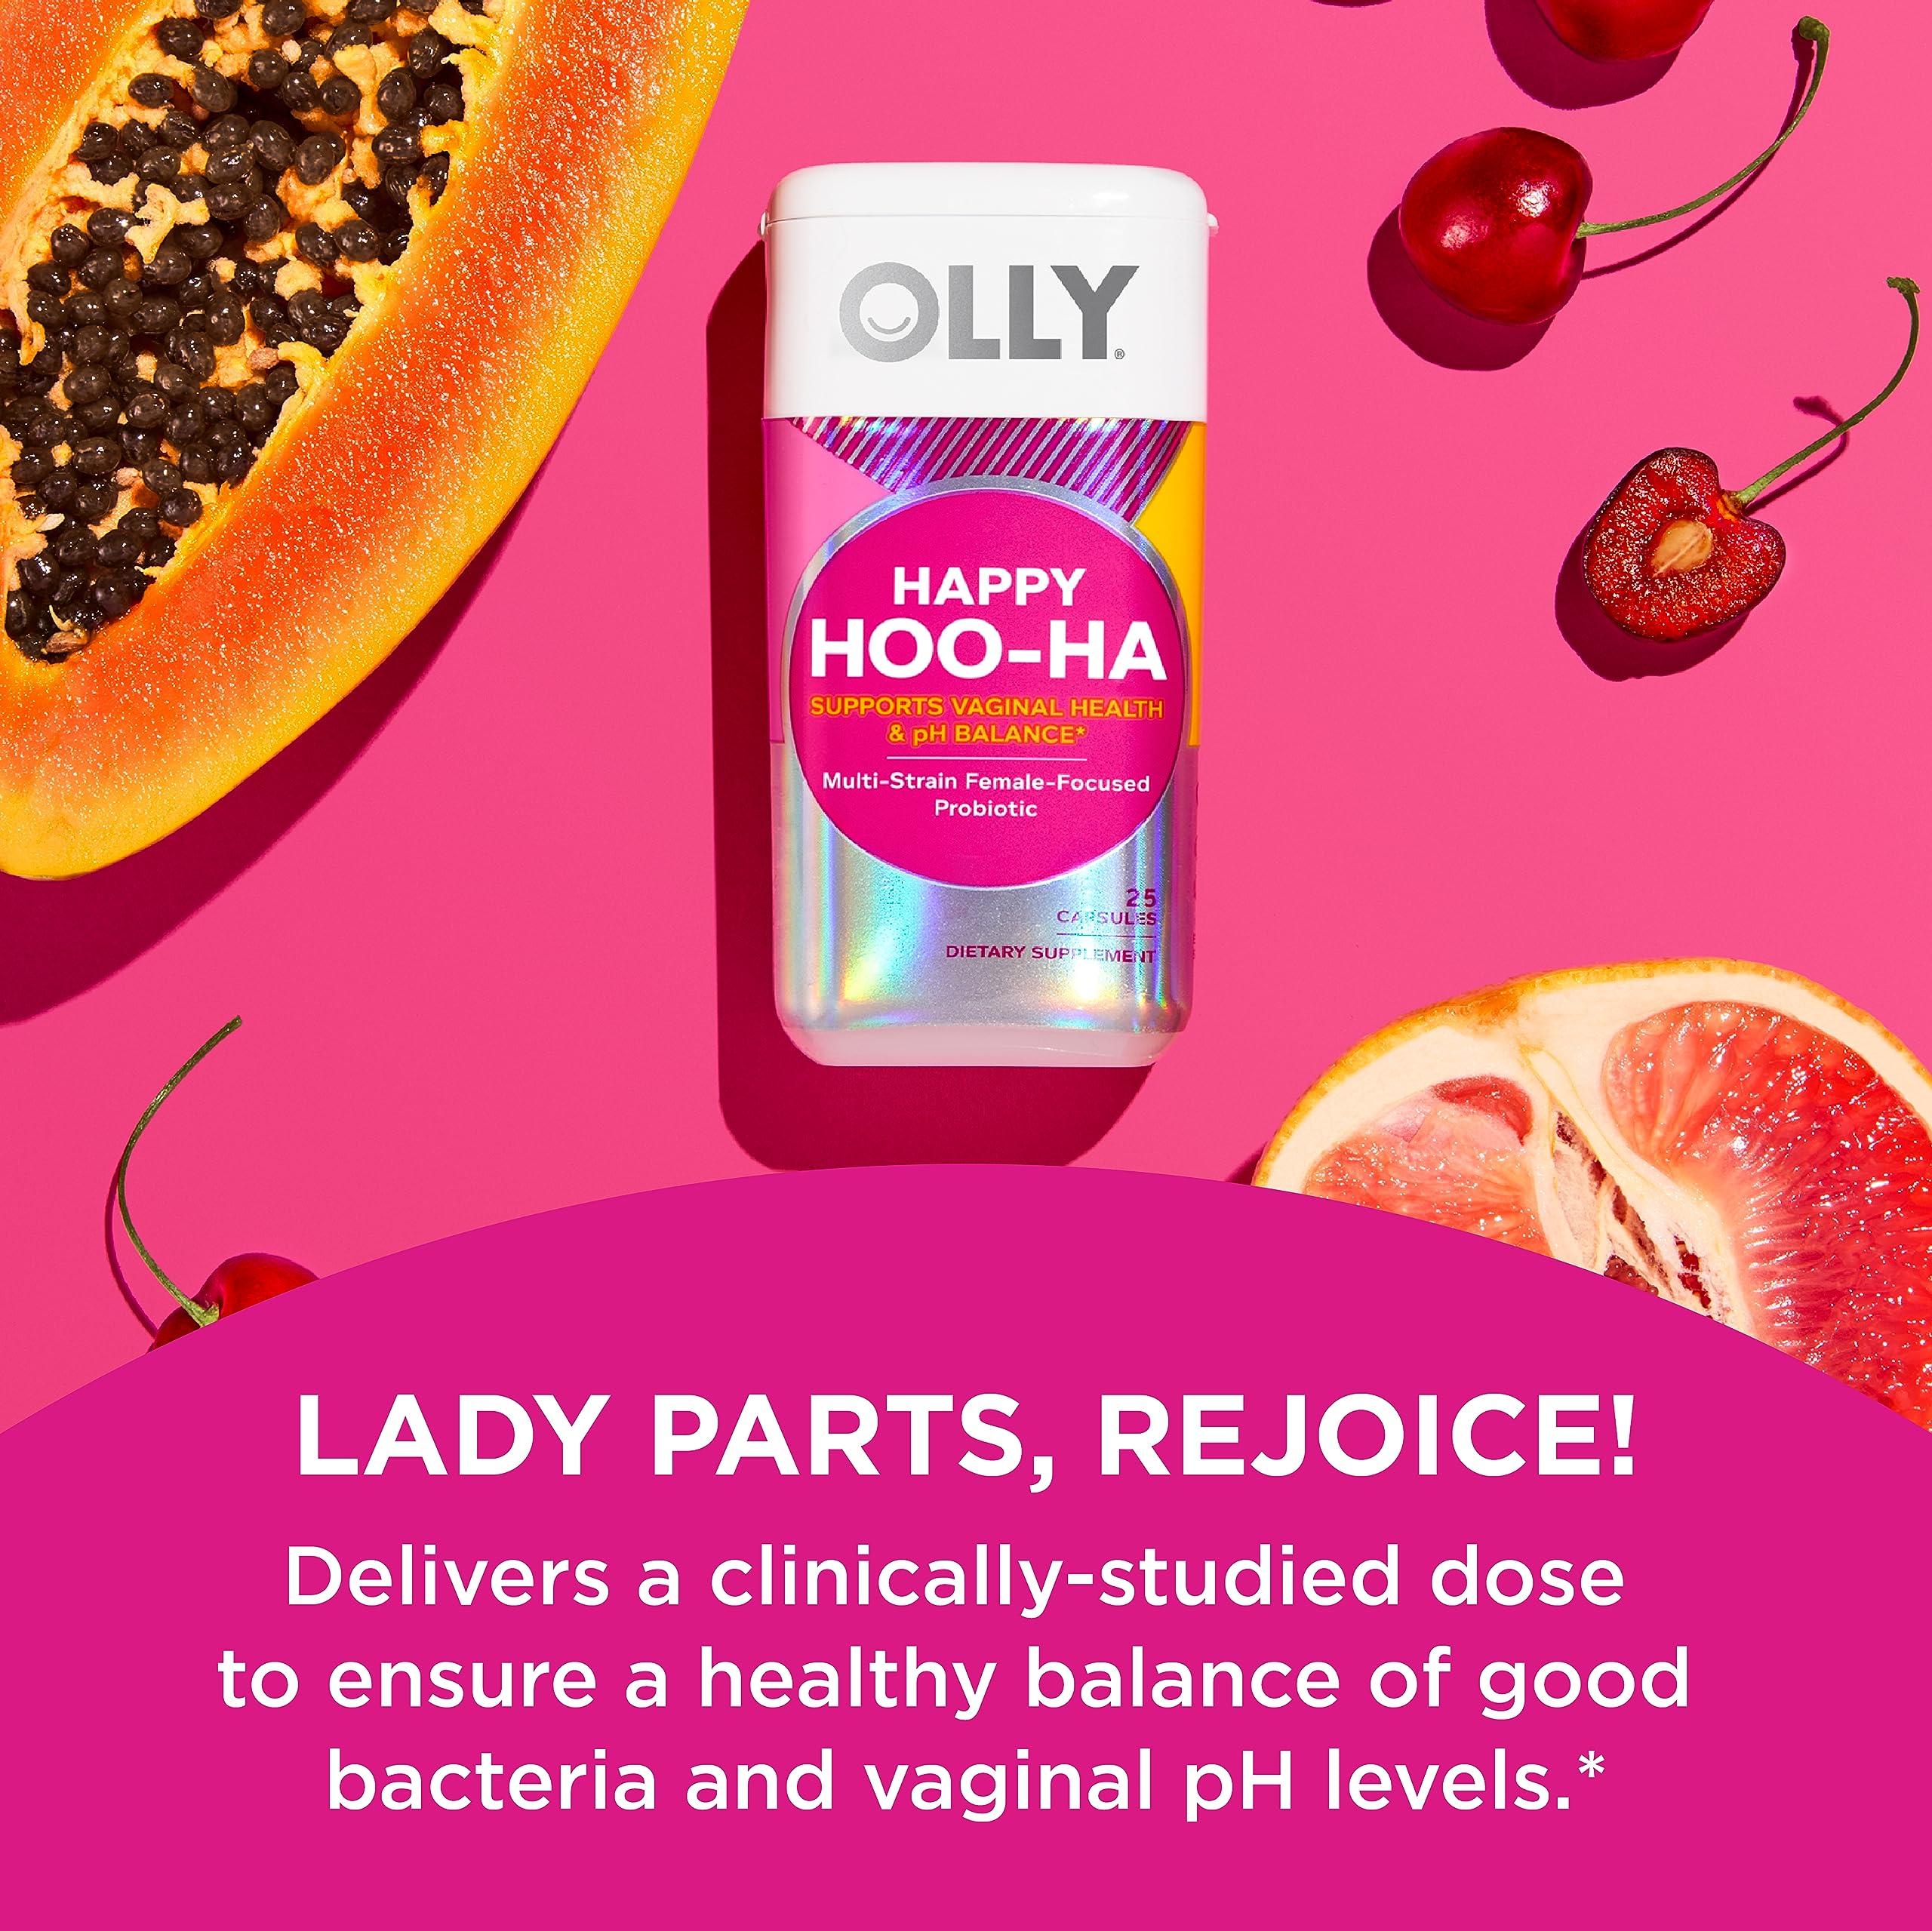 OLLY Ultra Strength Prenatal Multivitamin Softgels, Supports Healthy Growth & Happy Hoo-Ha Capsules, Probiotic for Women, Vaginal Health and pH Balance, 10 Billion CFU, Gluten Free - 25 Count